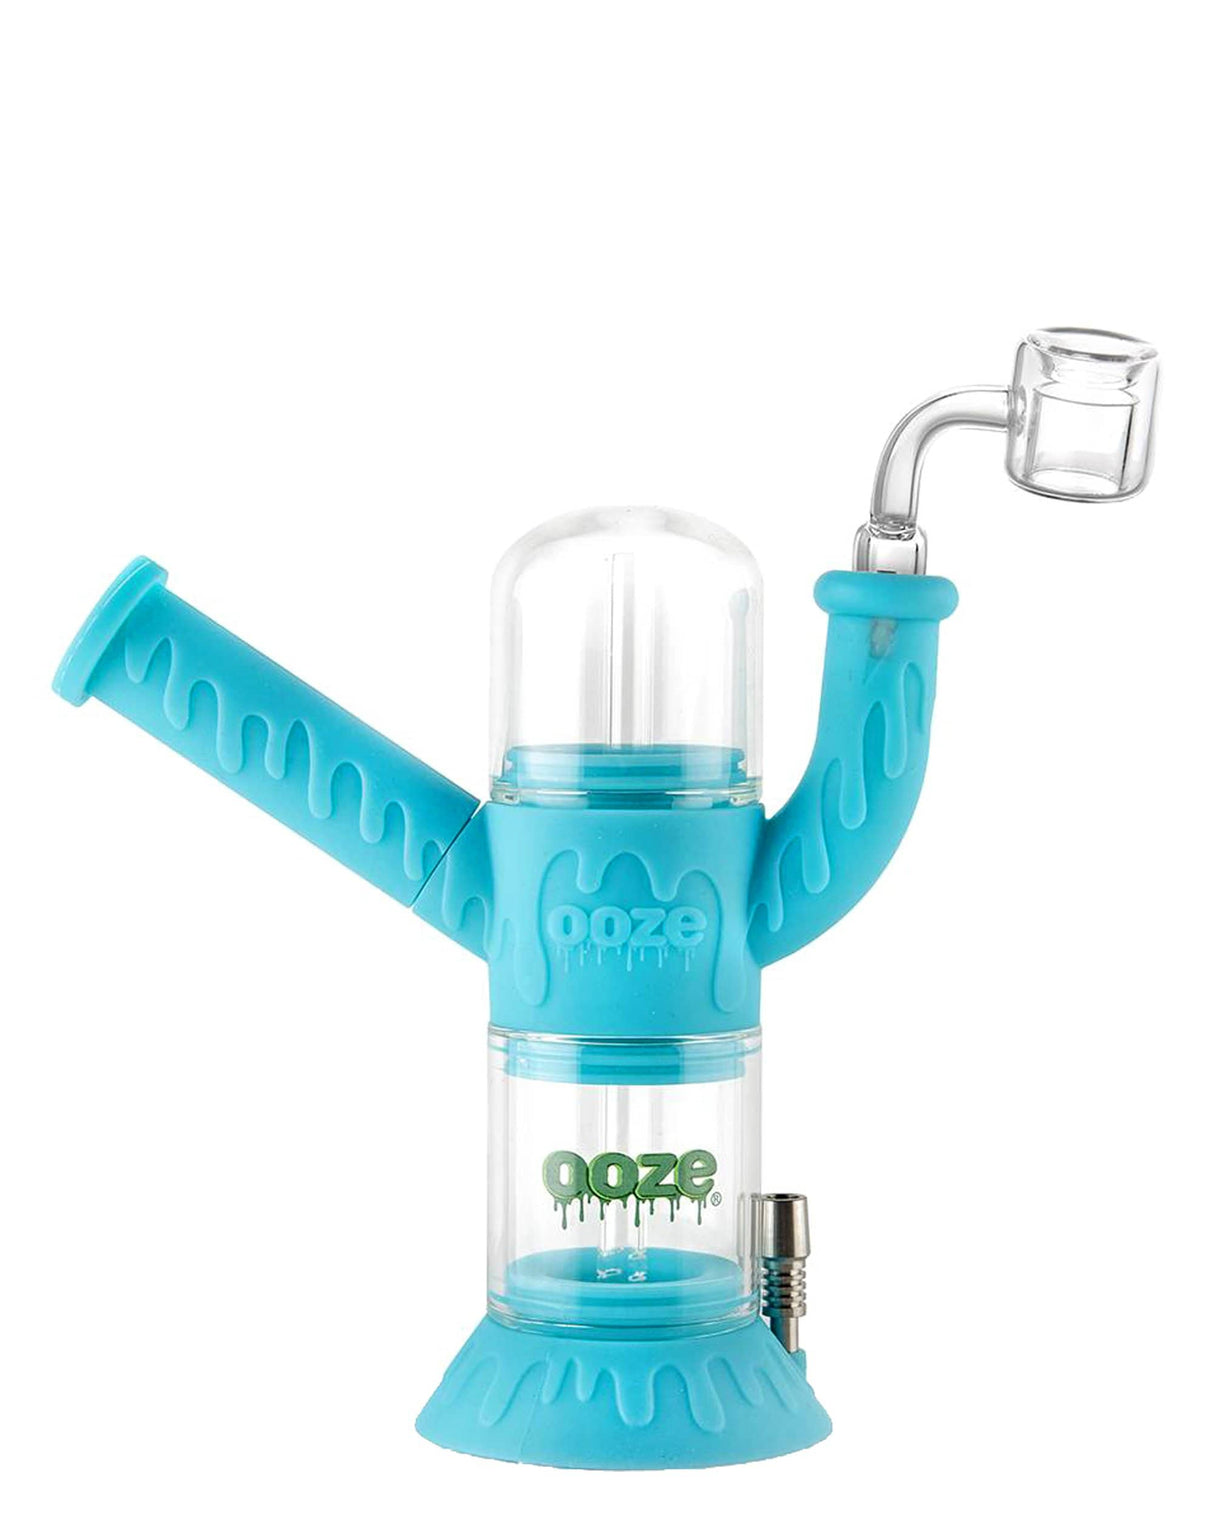 Ooze Cranium Bong & Dab Rig in Teal, 8" Hybrid Silicone Glass with Quartz Banger - Front View